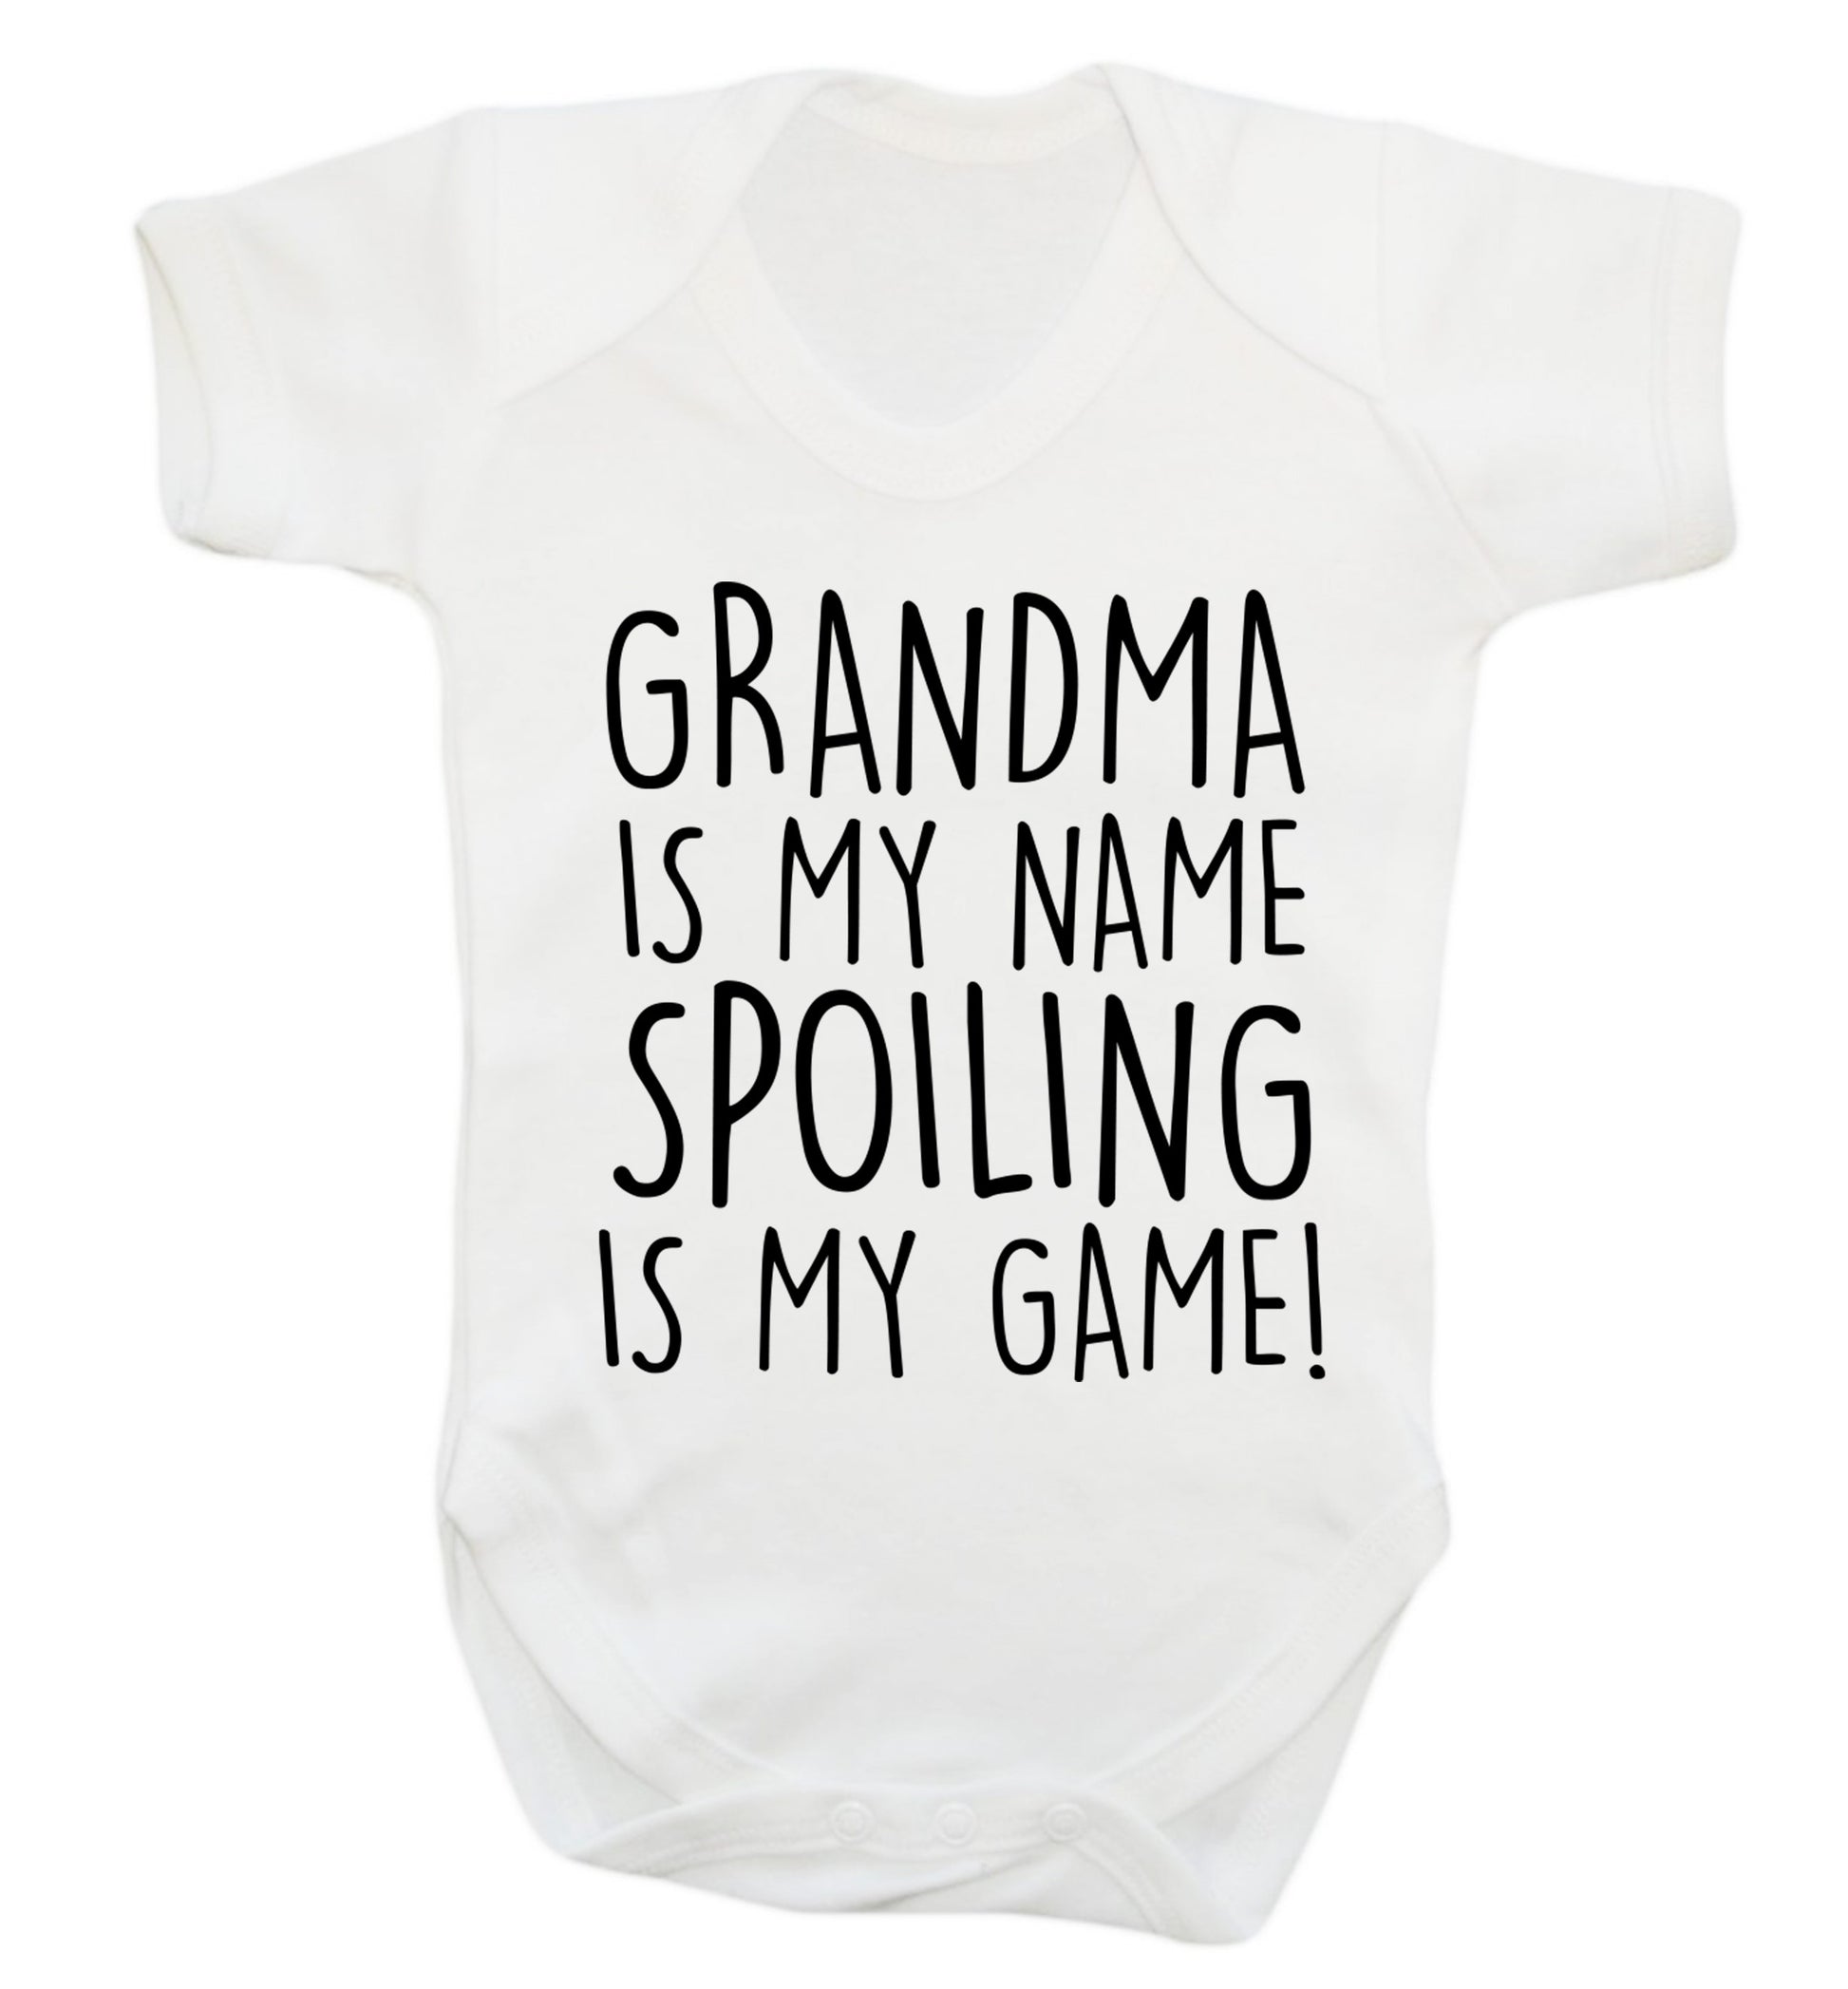 Grandma is my name, spoiling is my game Baby Vest white 18-24 months